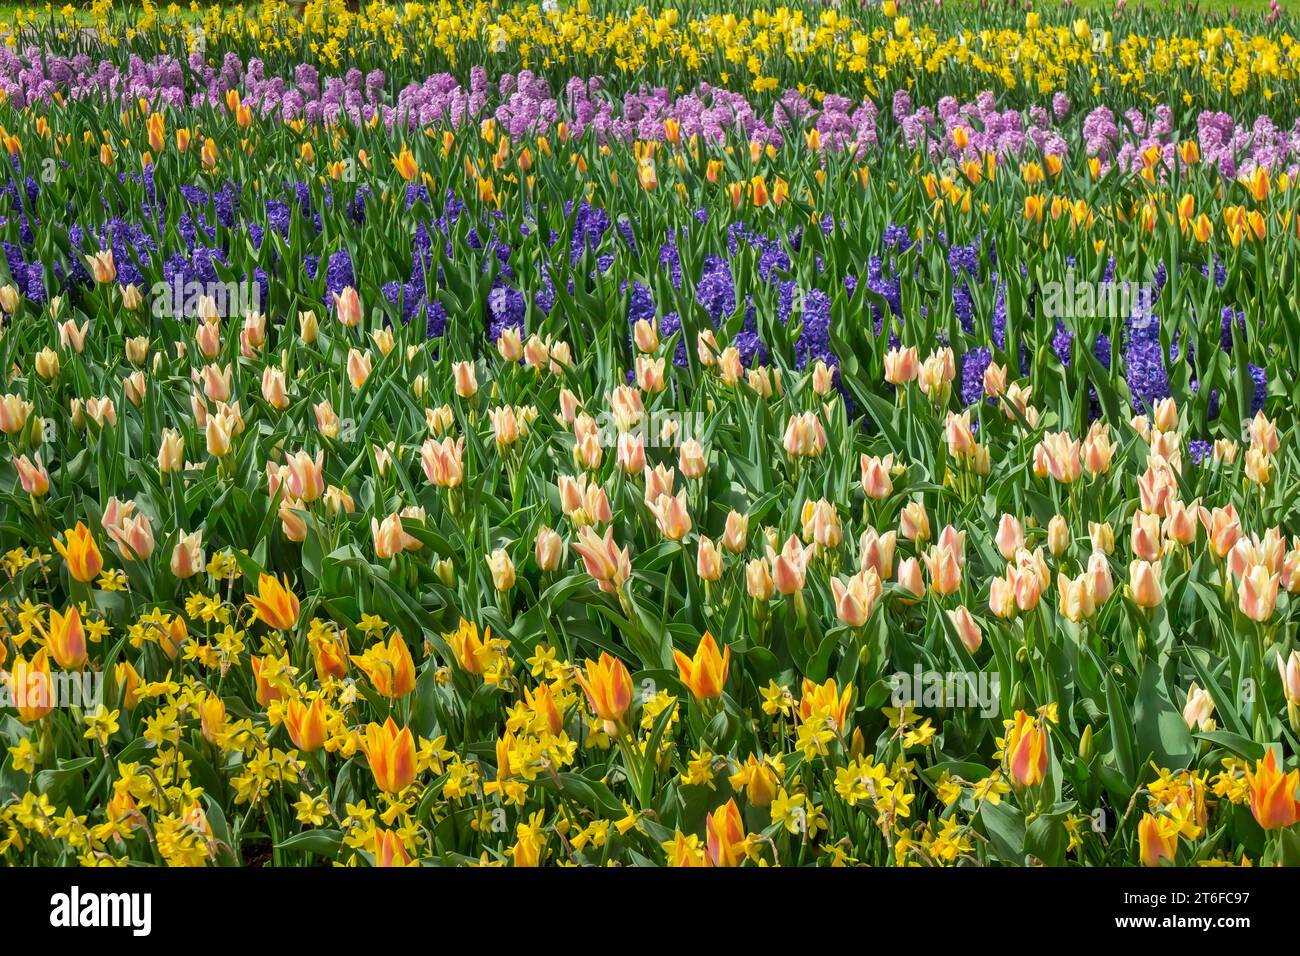 Colourful flower bed with tulips, hyacinths and daffodils, Keukenhof, Lisse, South Holland, Netherlands Stock Photo